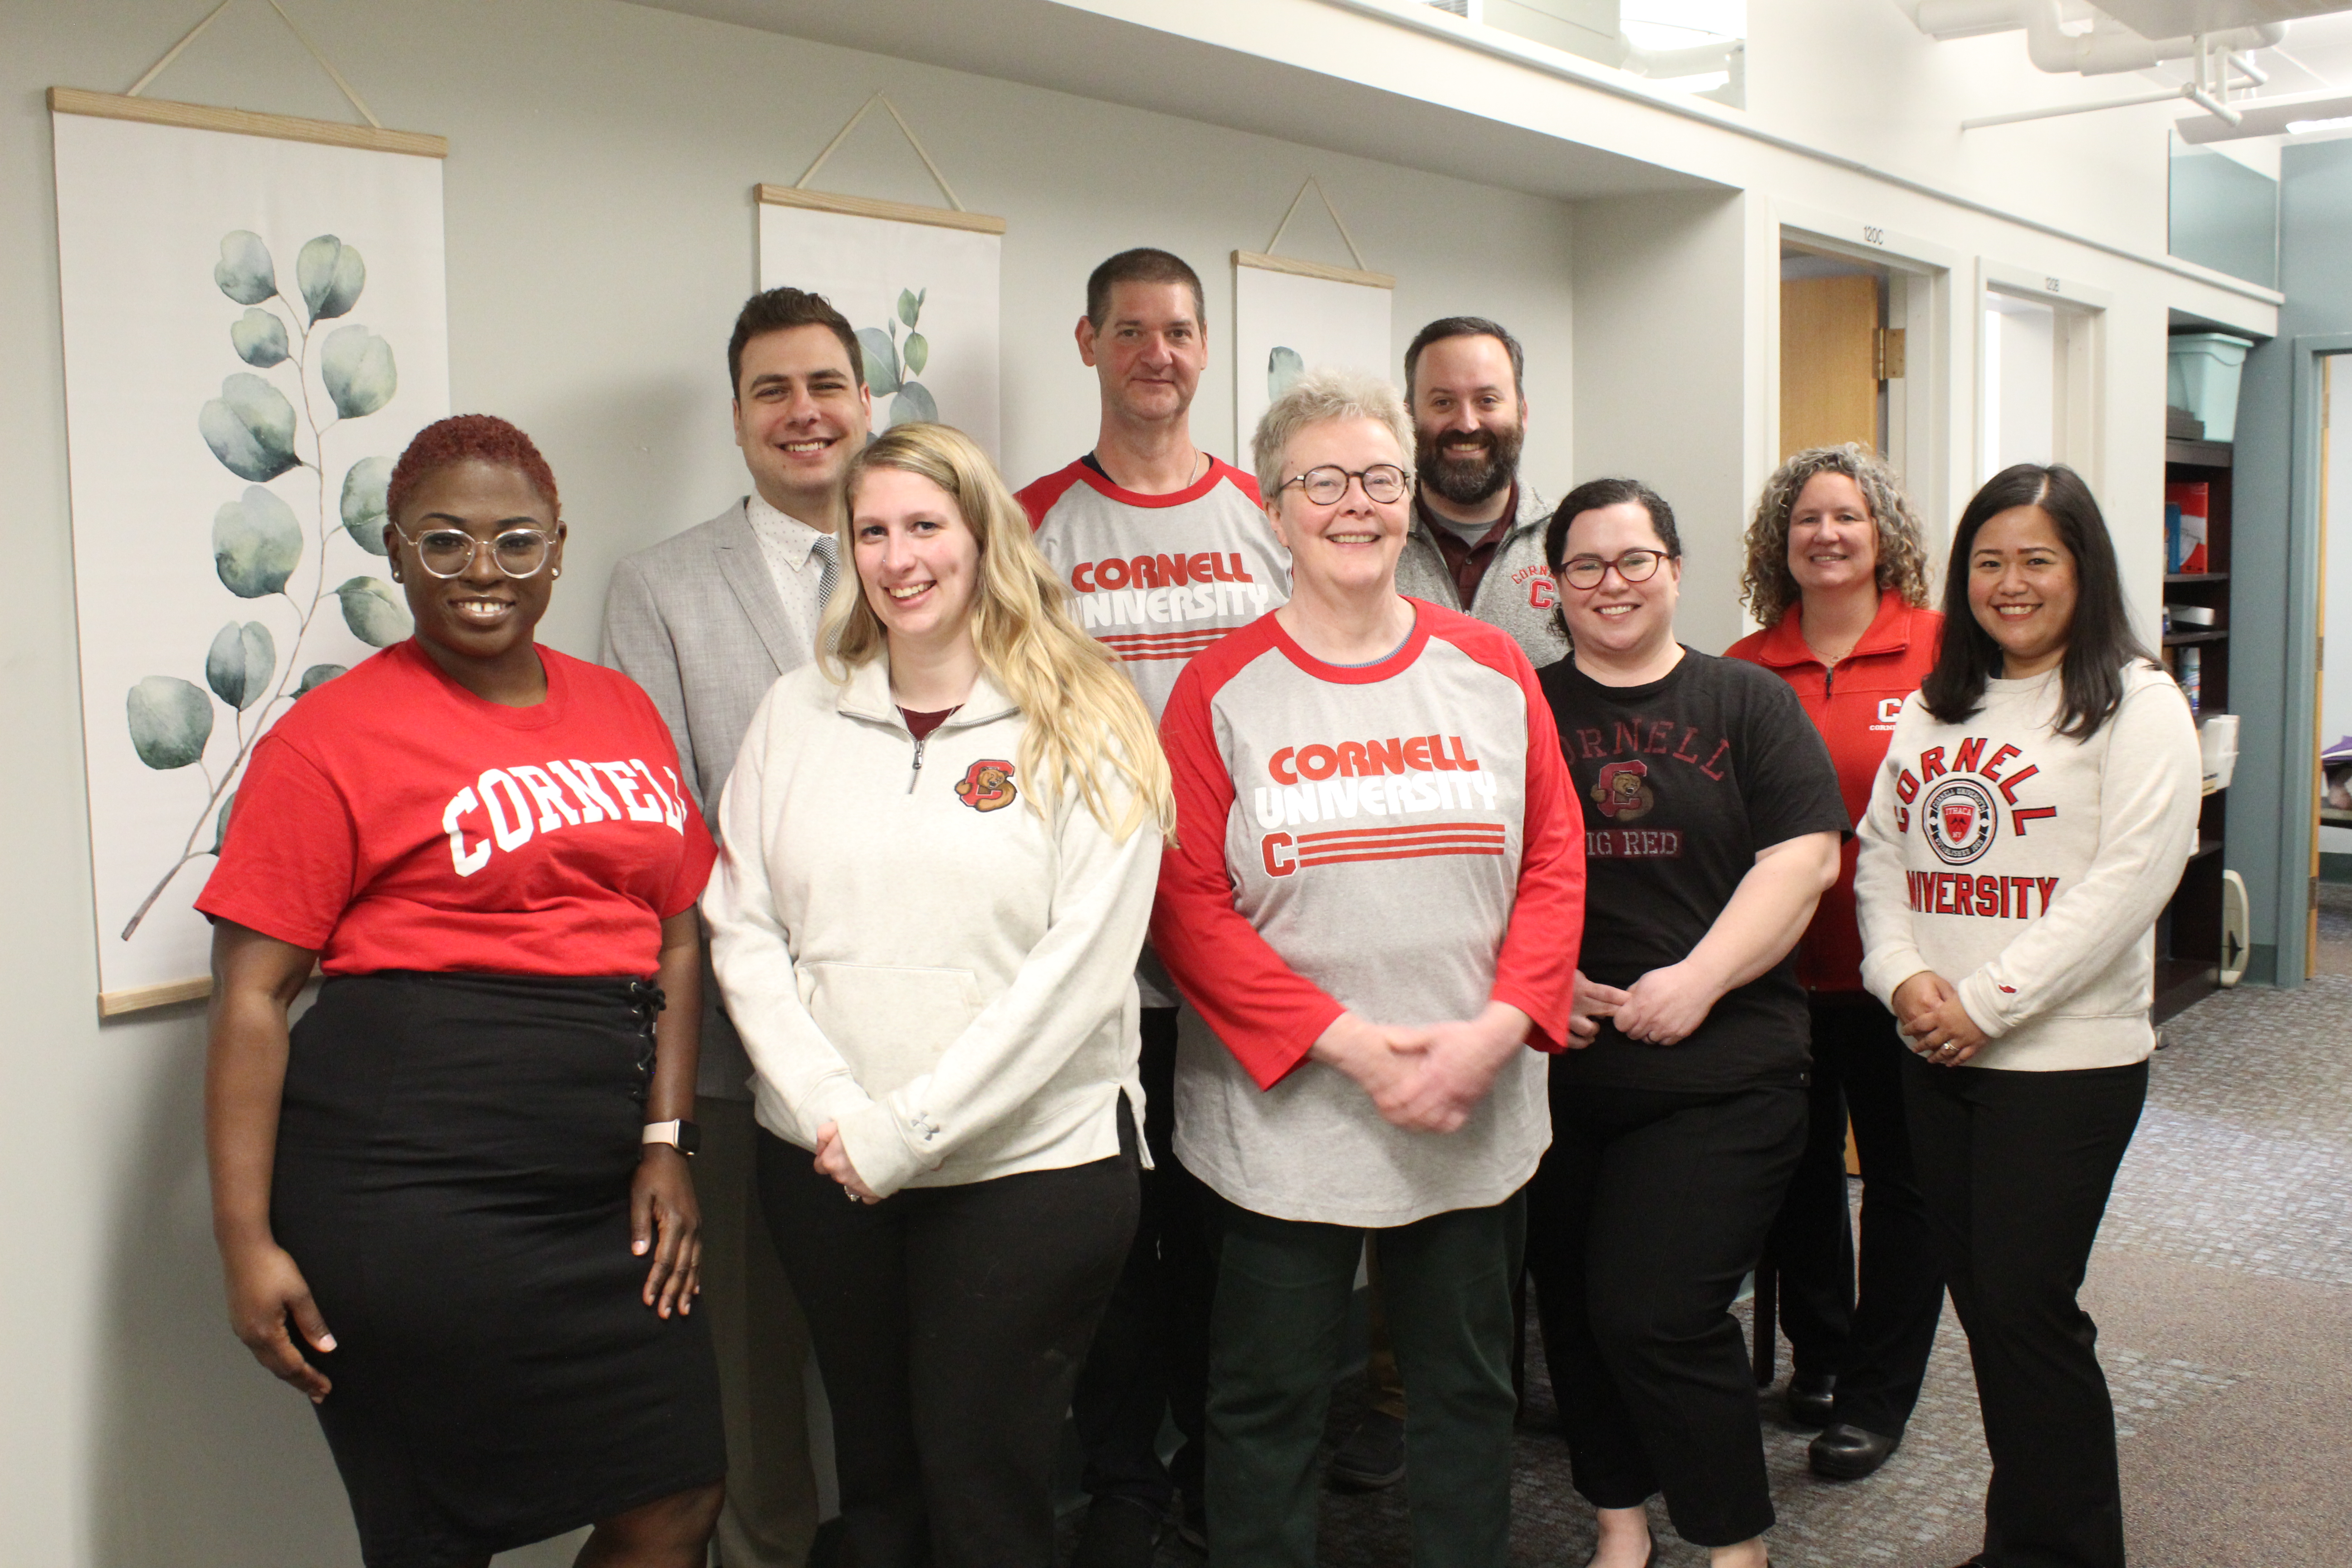 Nine members of the Office of Student Conduct and Community Standards pose for a group photo in front of a white wall wearing red Cornell gear.